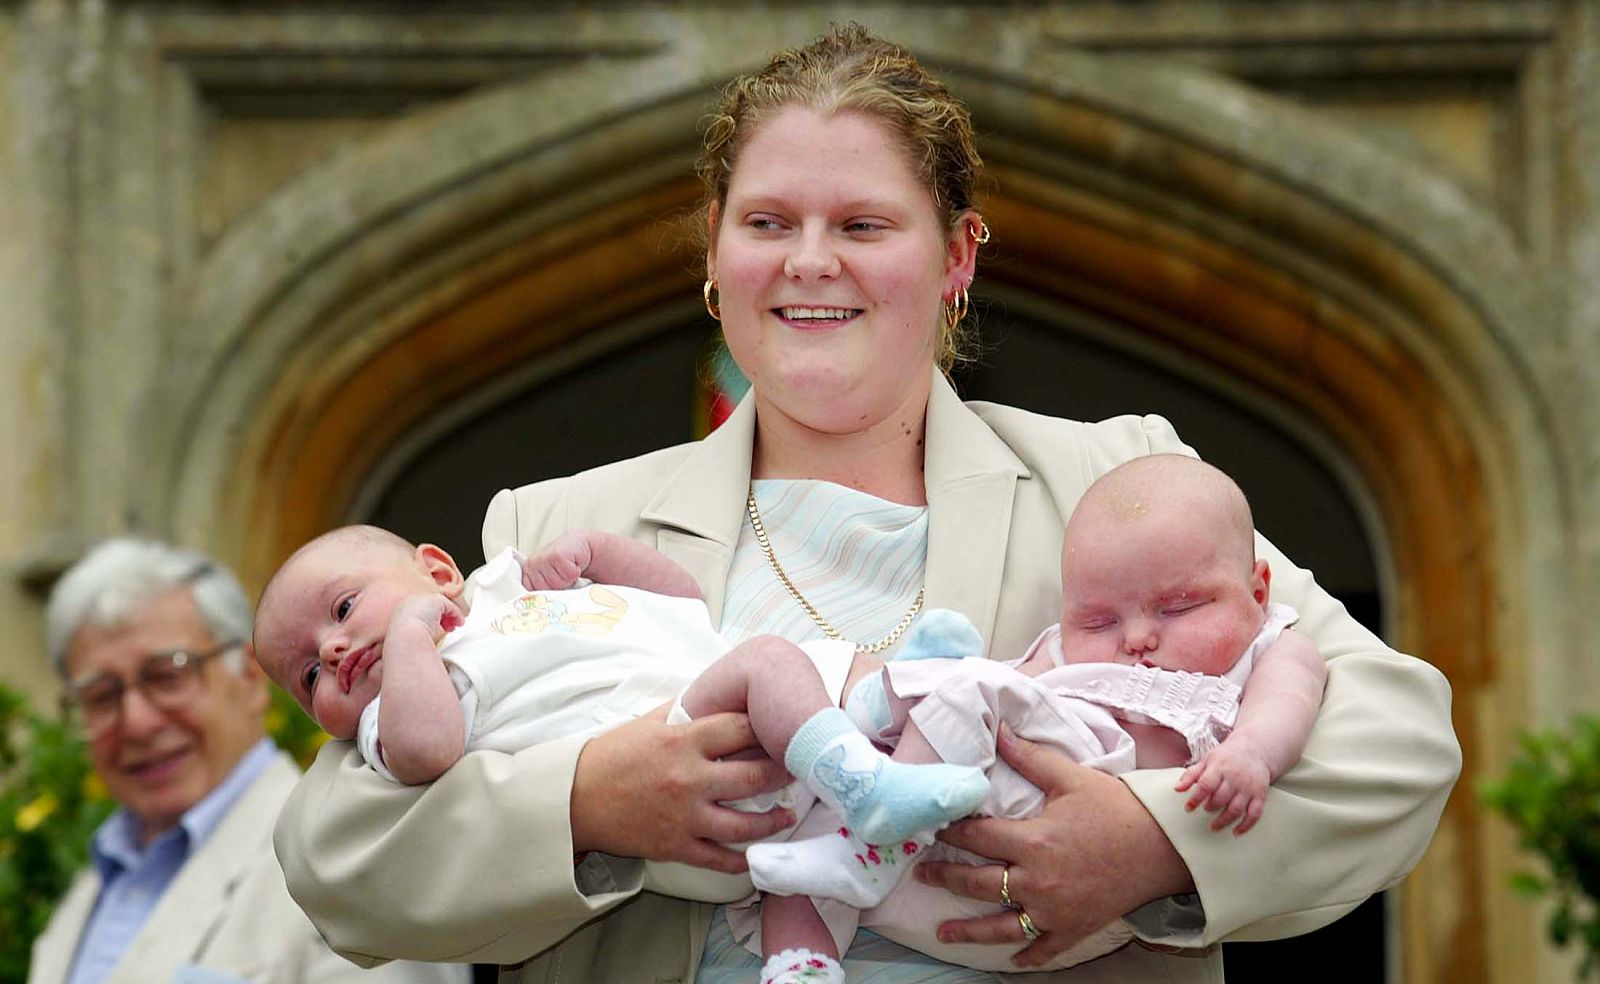 WORLD'S FIRST TEST TUBE BABY LOUISE BROWN FACES MEDIA FOR 25TH